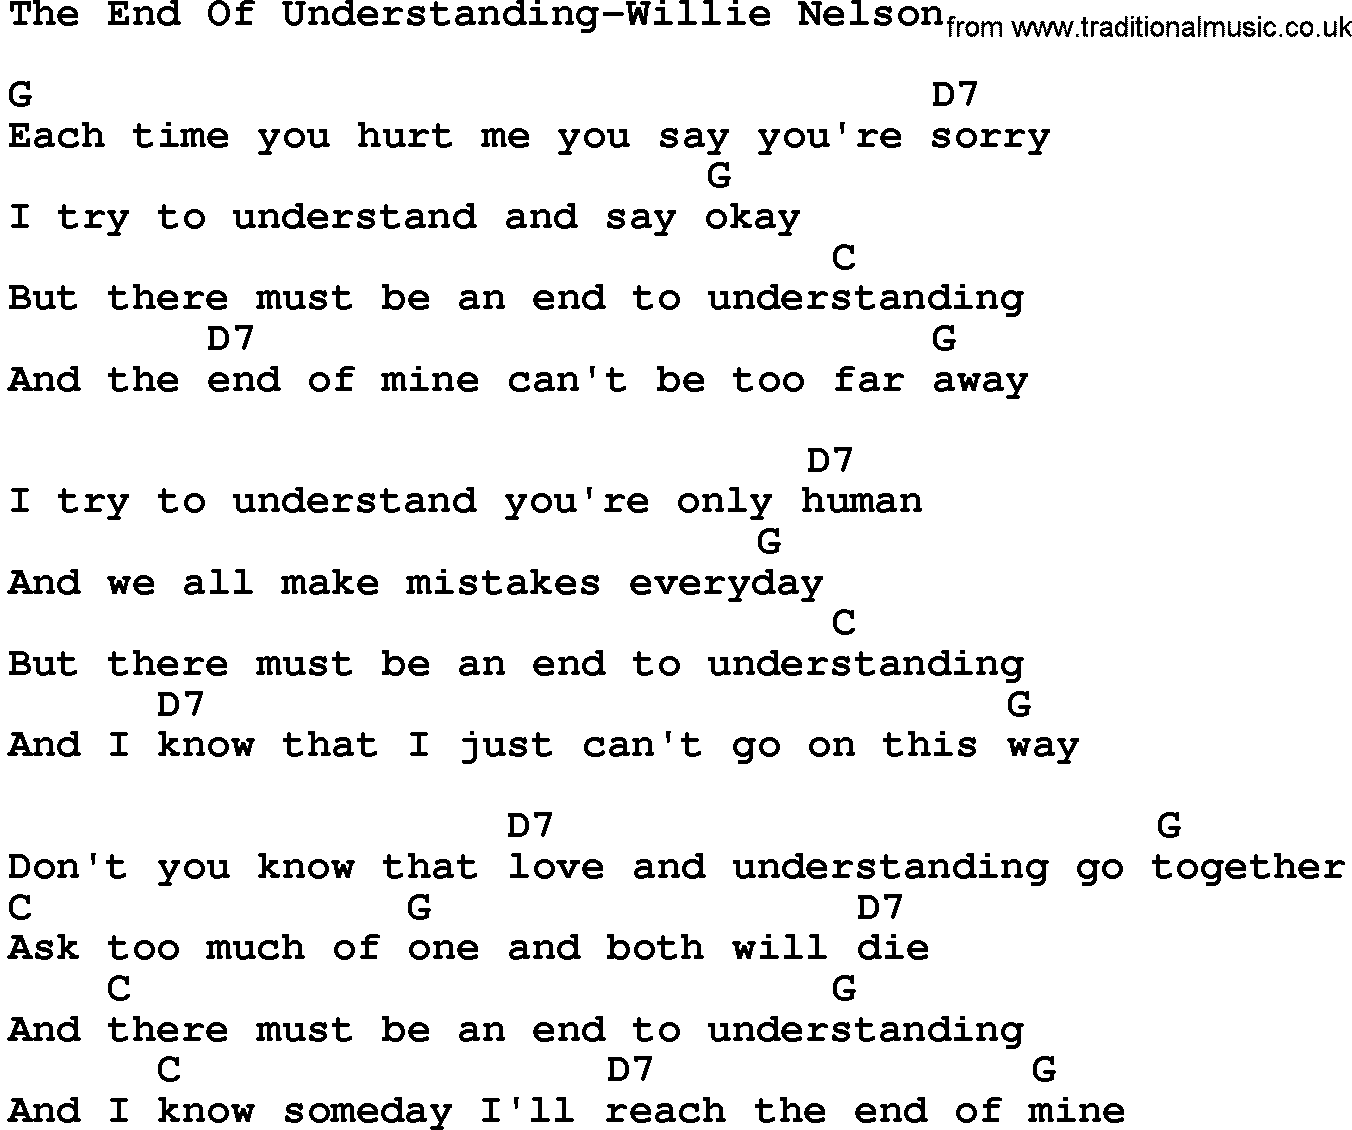 Country music song: The End Of Understanding-Willie Nelson lyrics and chords